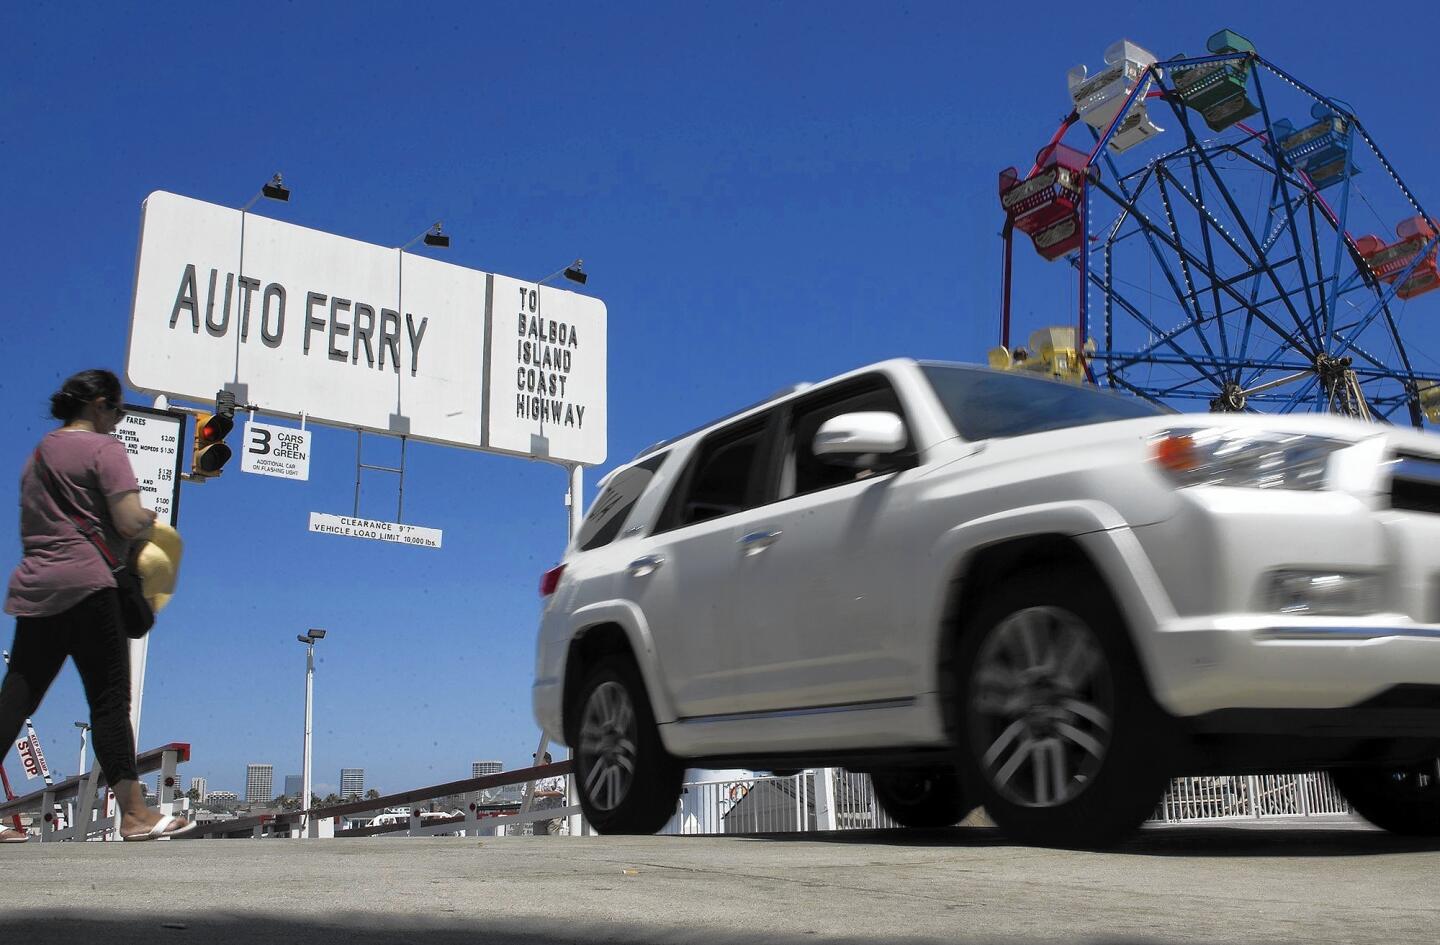 A motorist exits the Auto Ferry at Palm Street near the Balboa Fun Zone in Newport Beach on Friday.